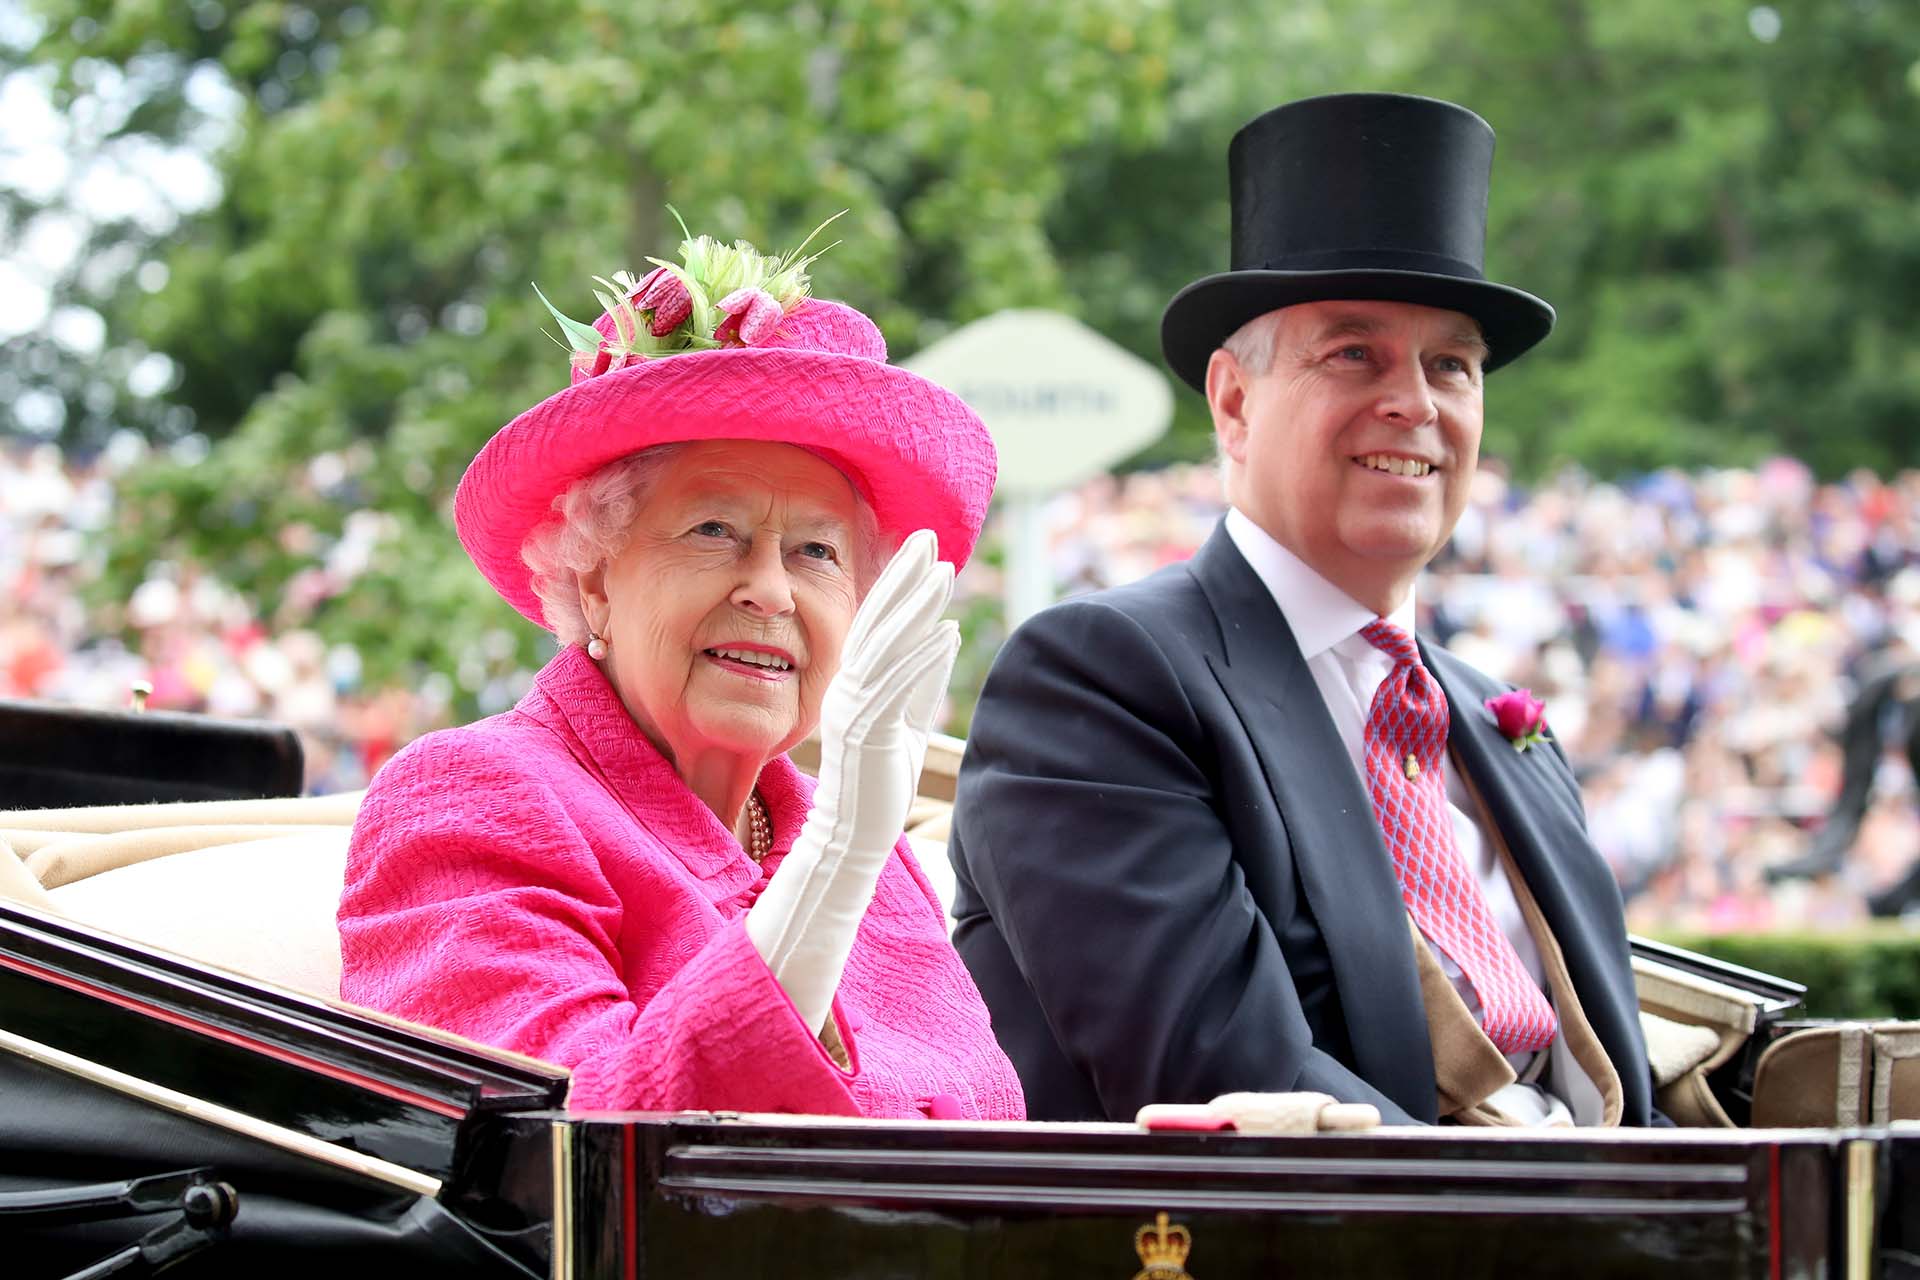 File photo: Queen Elizabeth II and Prince Andrew at an event in Ascot, England on June 22, 2017 (Chris Jackson/Getty Images)